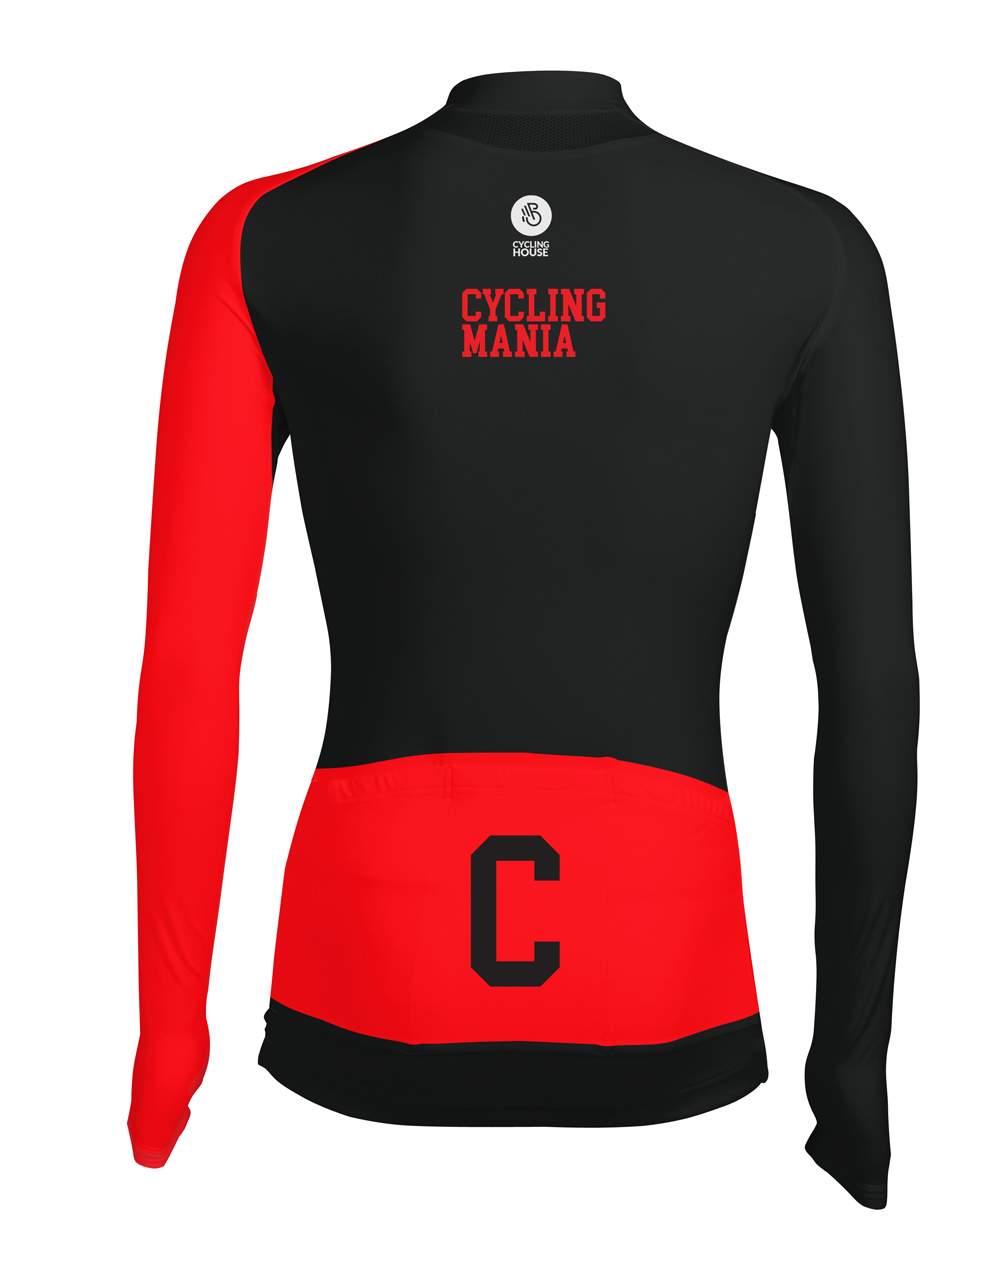 Cycling jersey with long sleeves CYCLING MANIA image 2